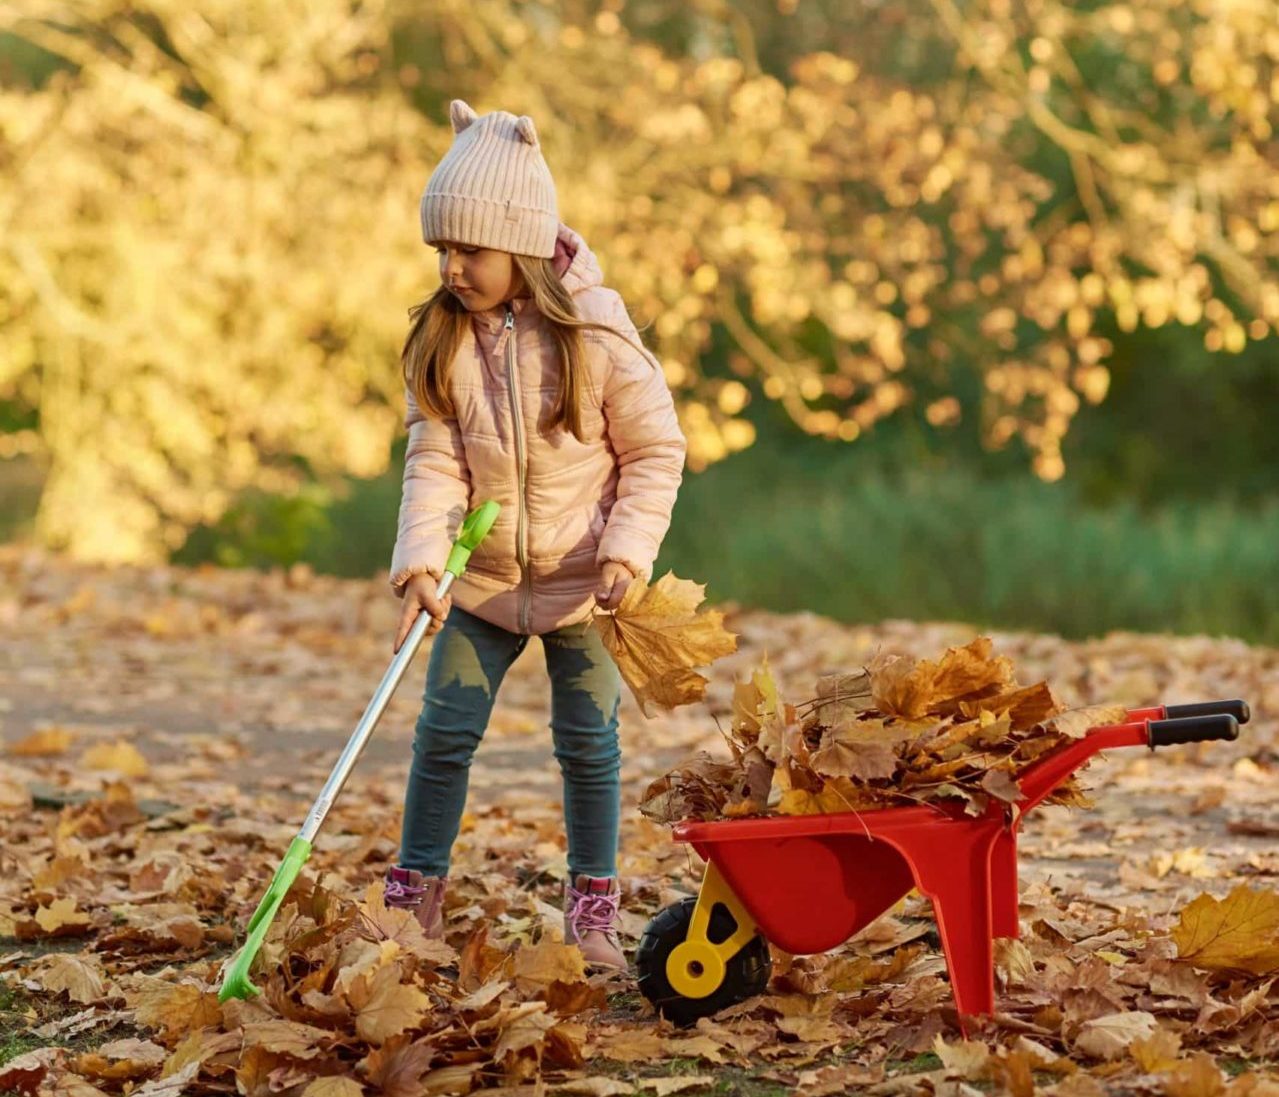 A young child rakes leaves in the grass.